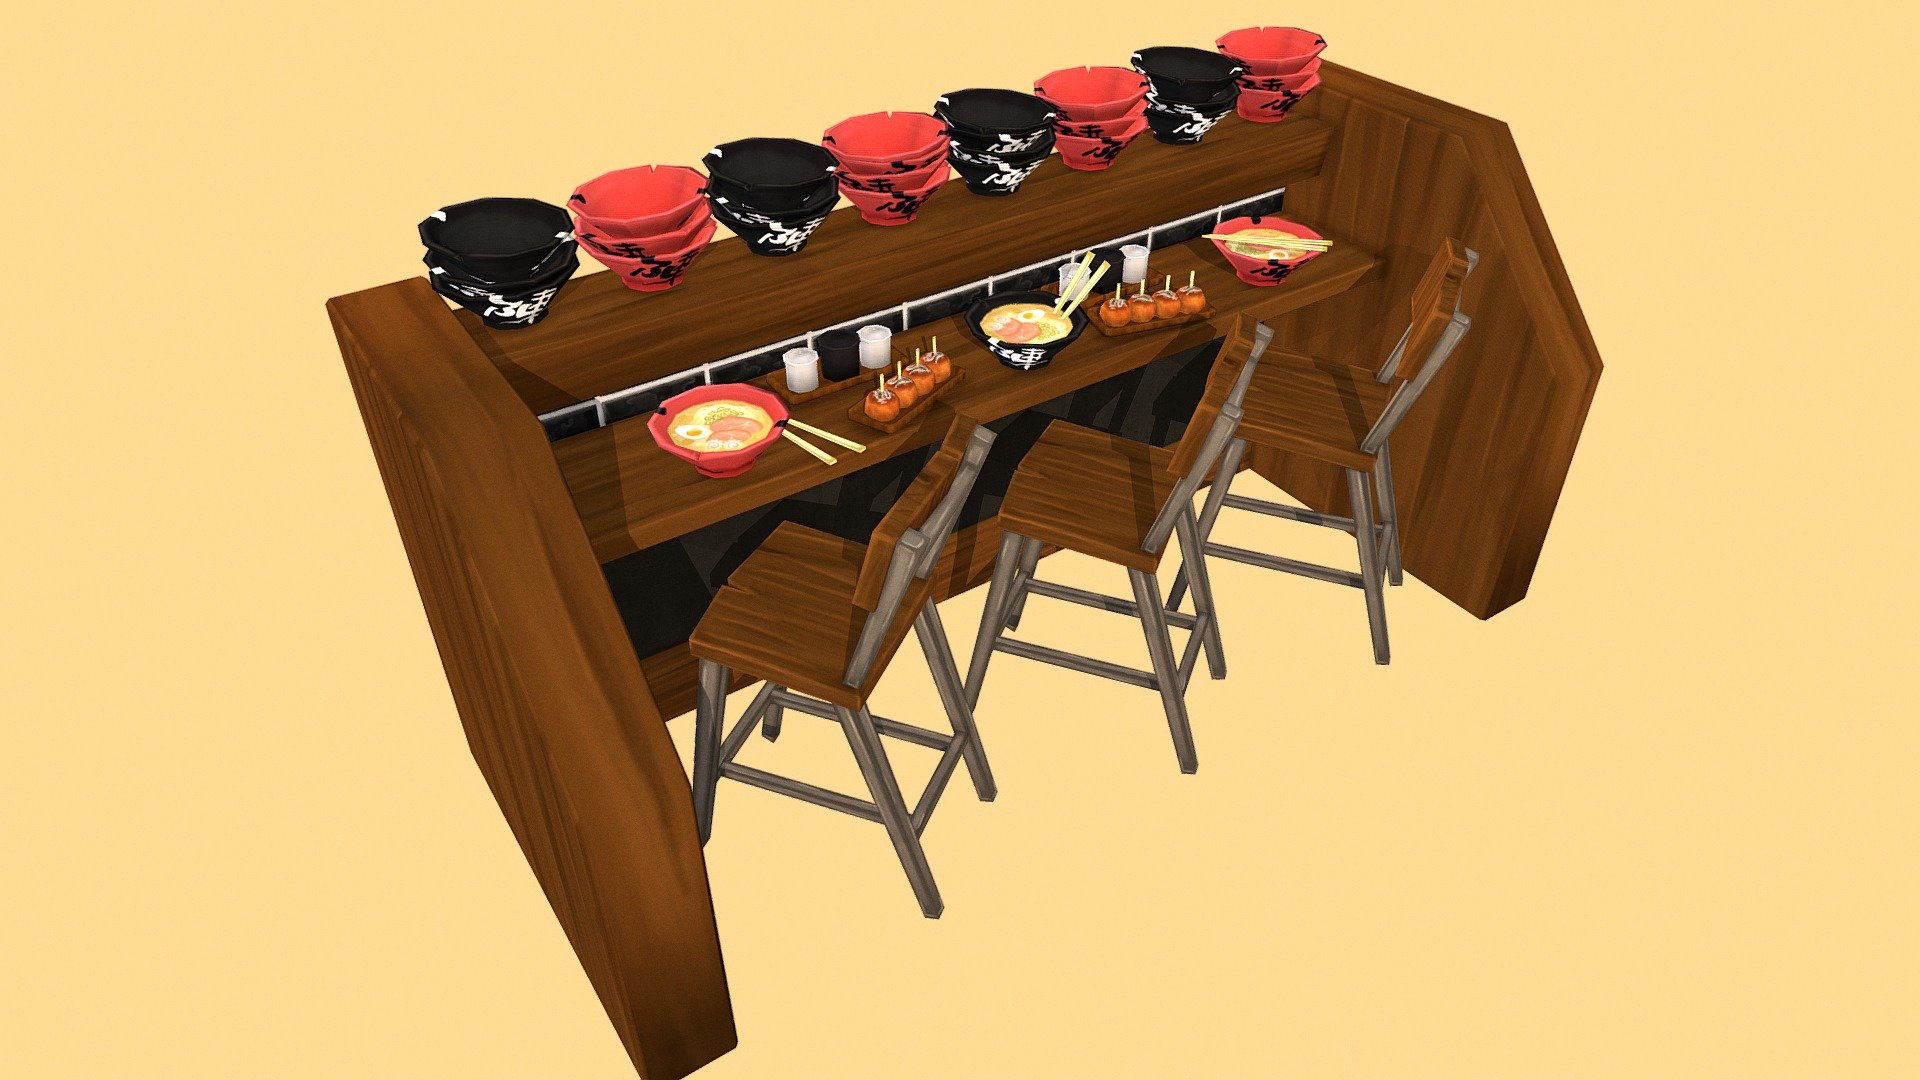 Throughout my journey in 2018, I was able to go to a ramen bar with a friend of mine ,and it inspired me so I made a stylized version of the restaurant 3d model